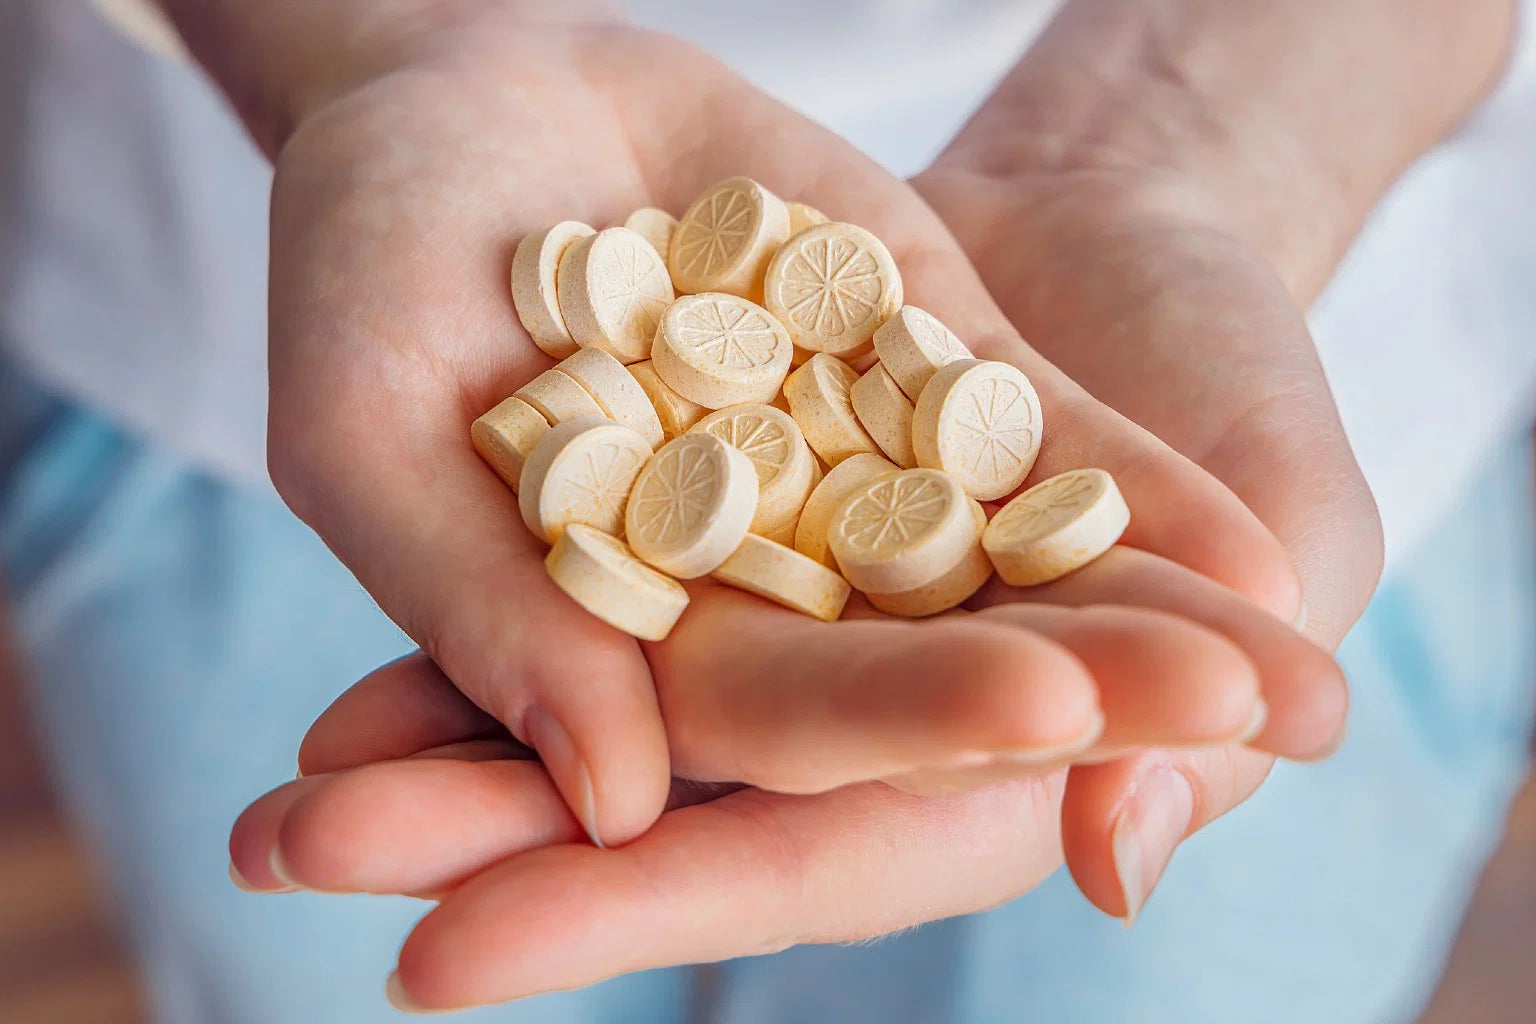 A handful of Vitamin C tablets